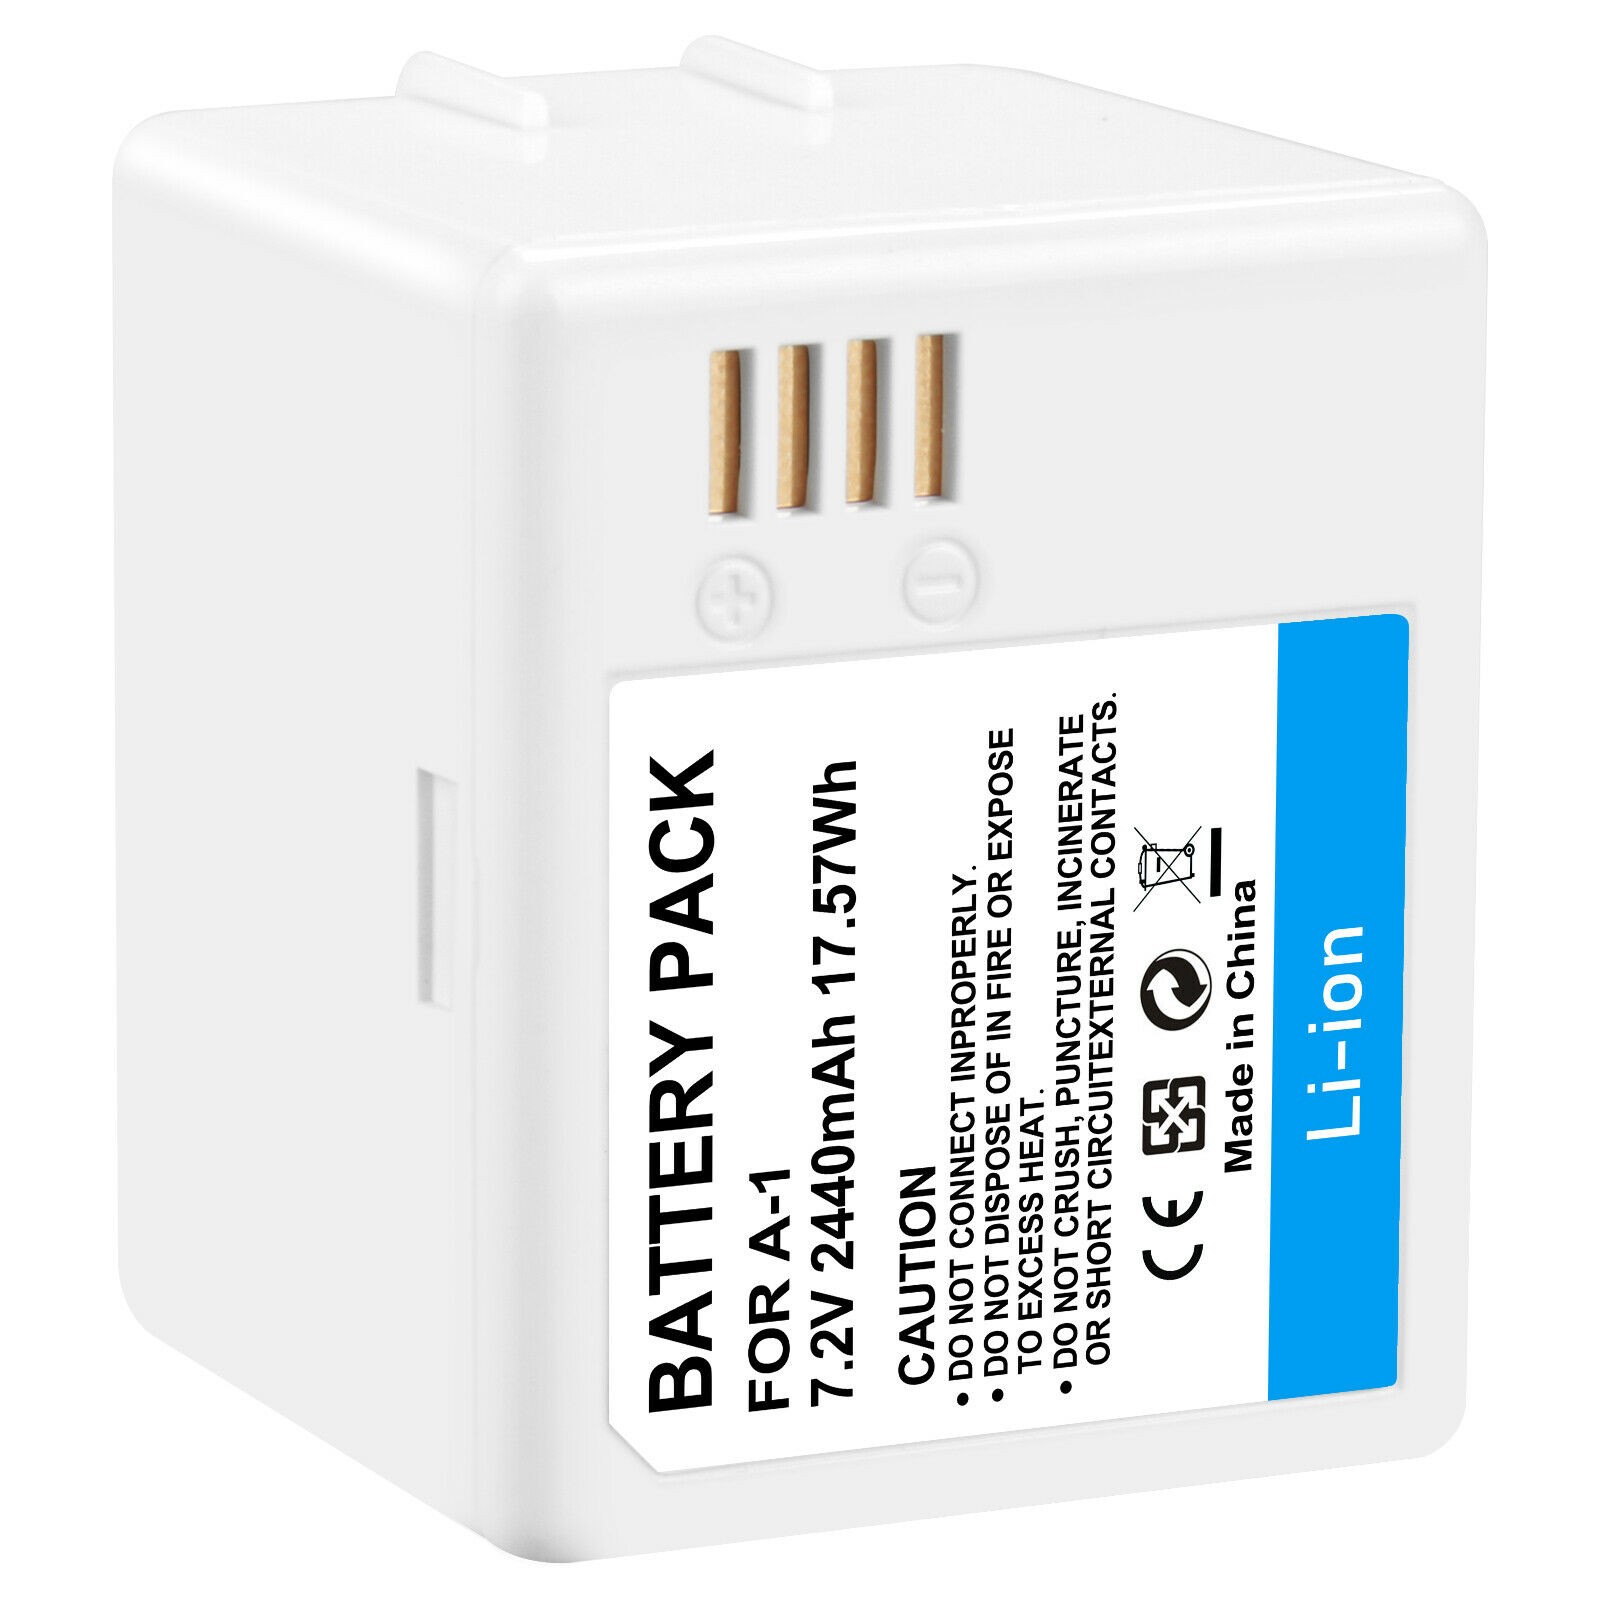 Replacement Battery for Arlo Pro Smart Security System Camera Batteryexpert